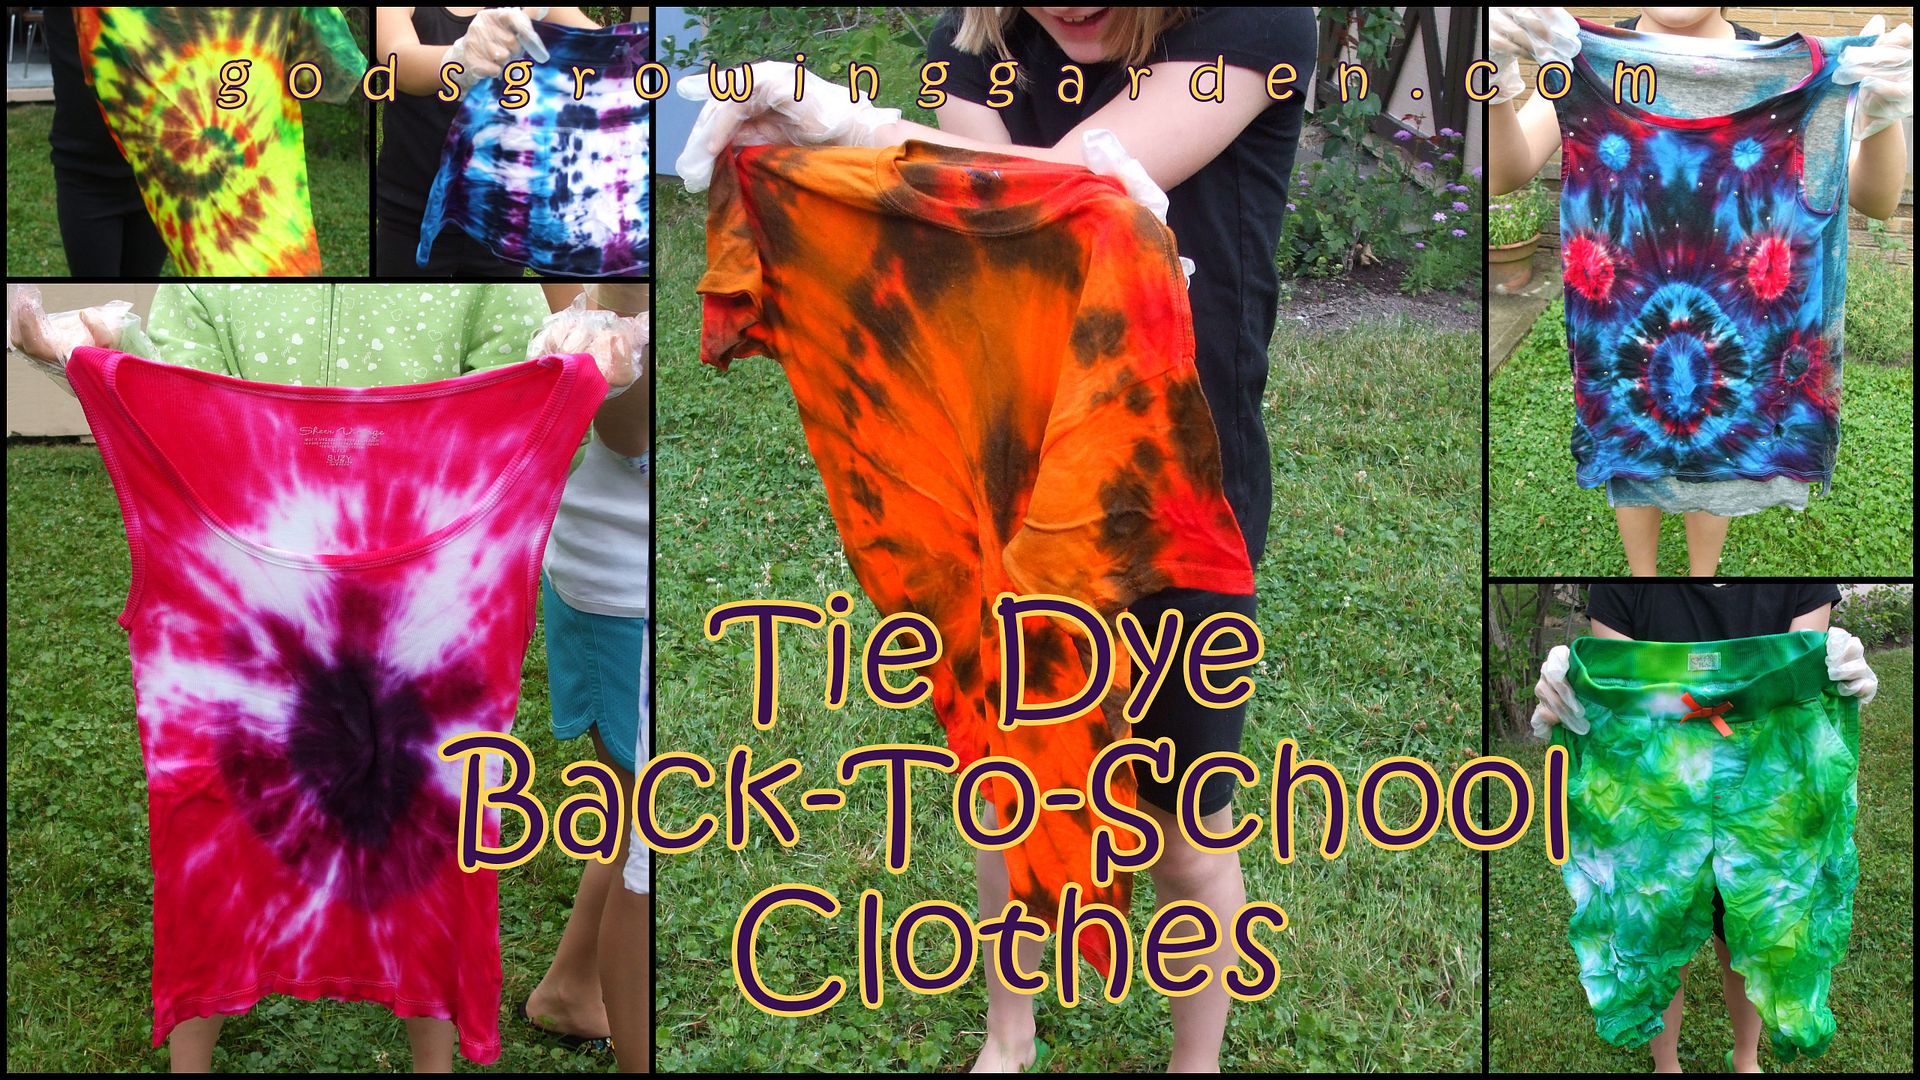 Tie Dye by Angie Ouellette-Tower for godsgrowinggarden.com photo 2014-08-06_zps8f1993bd.jpg